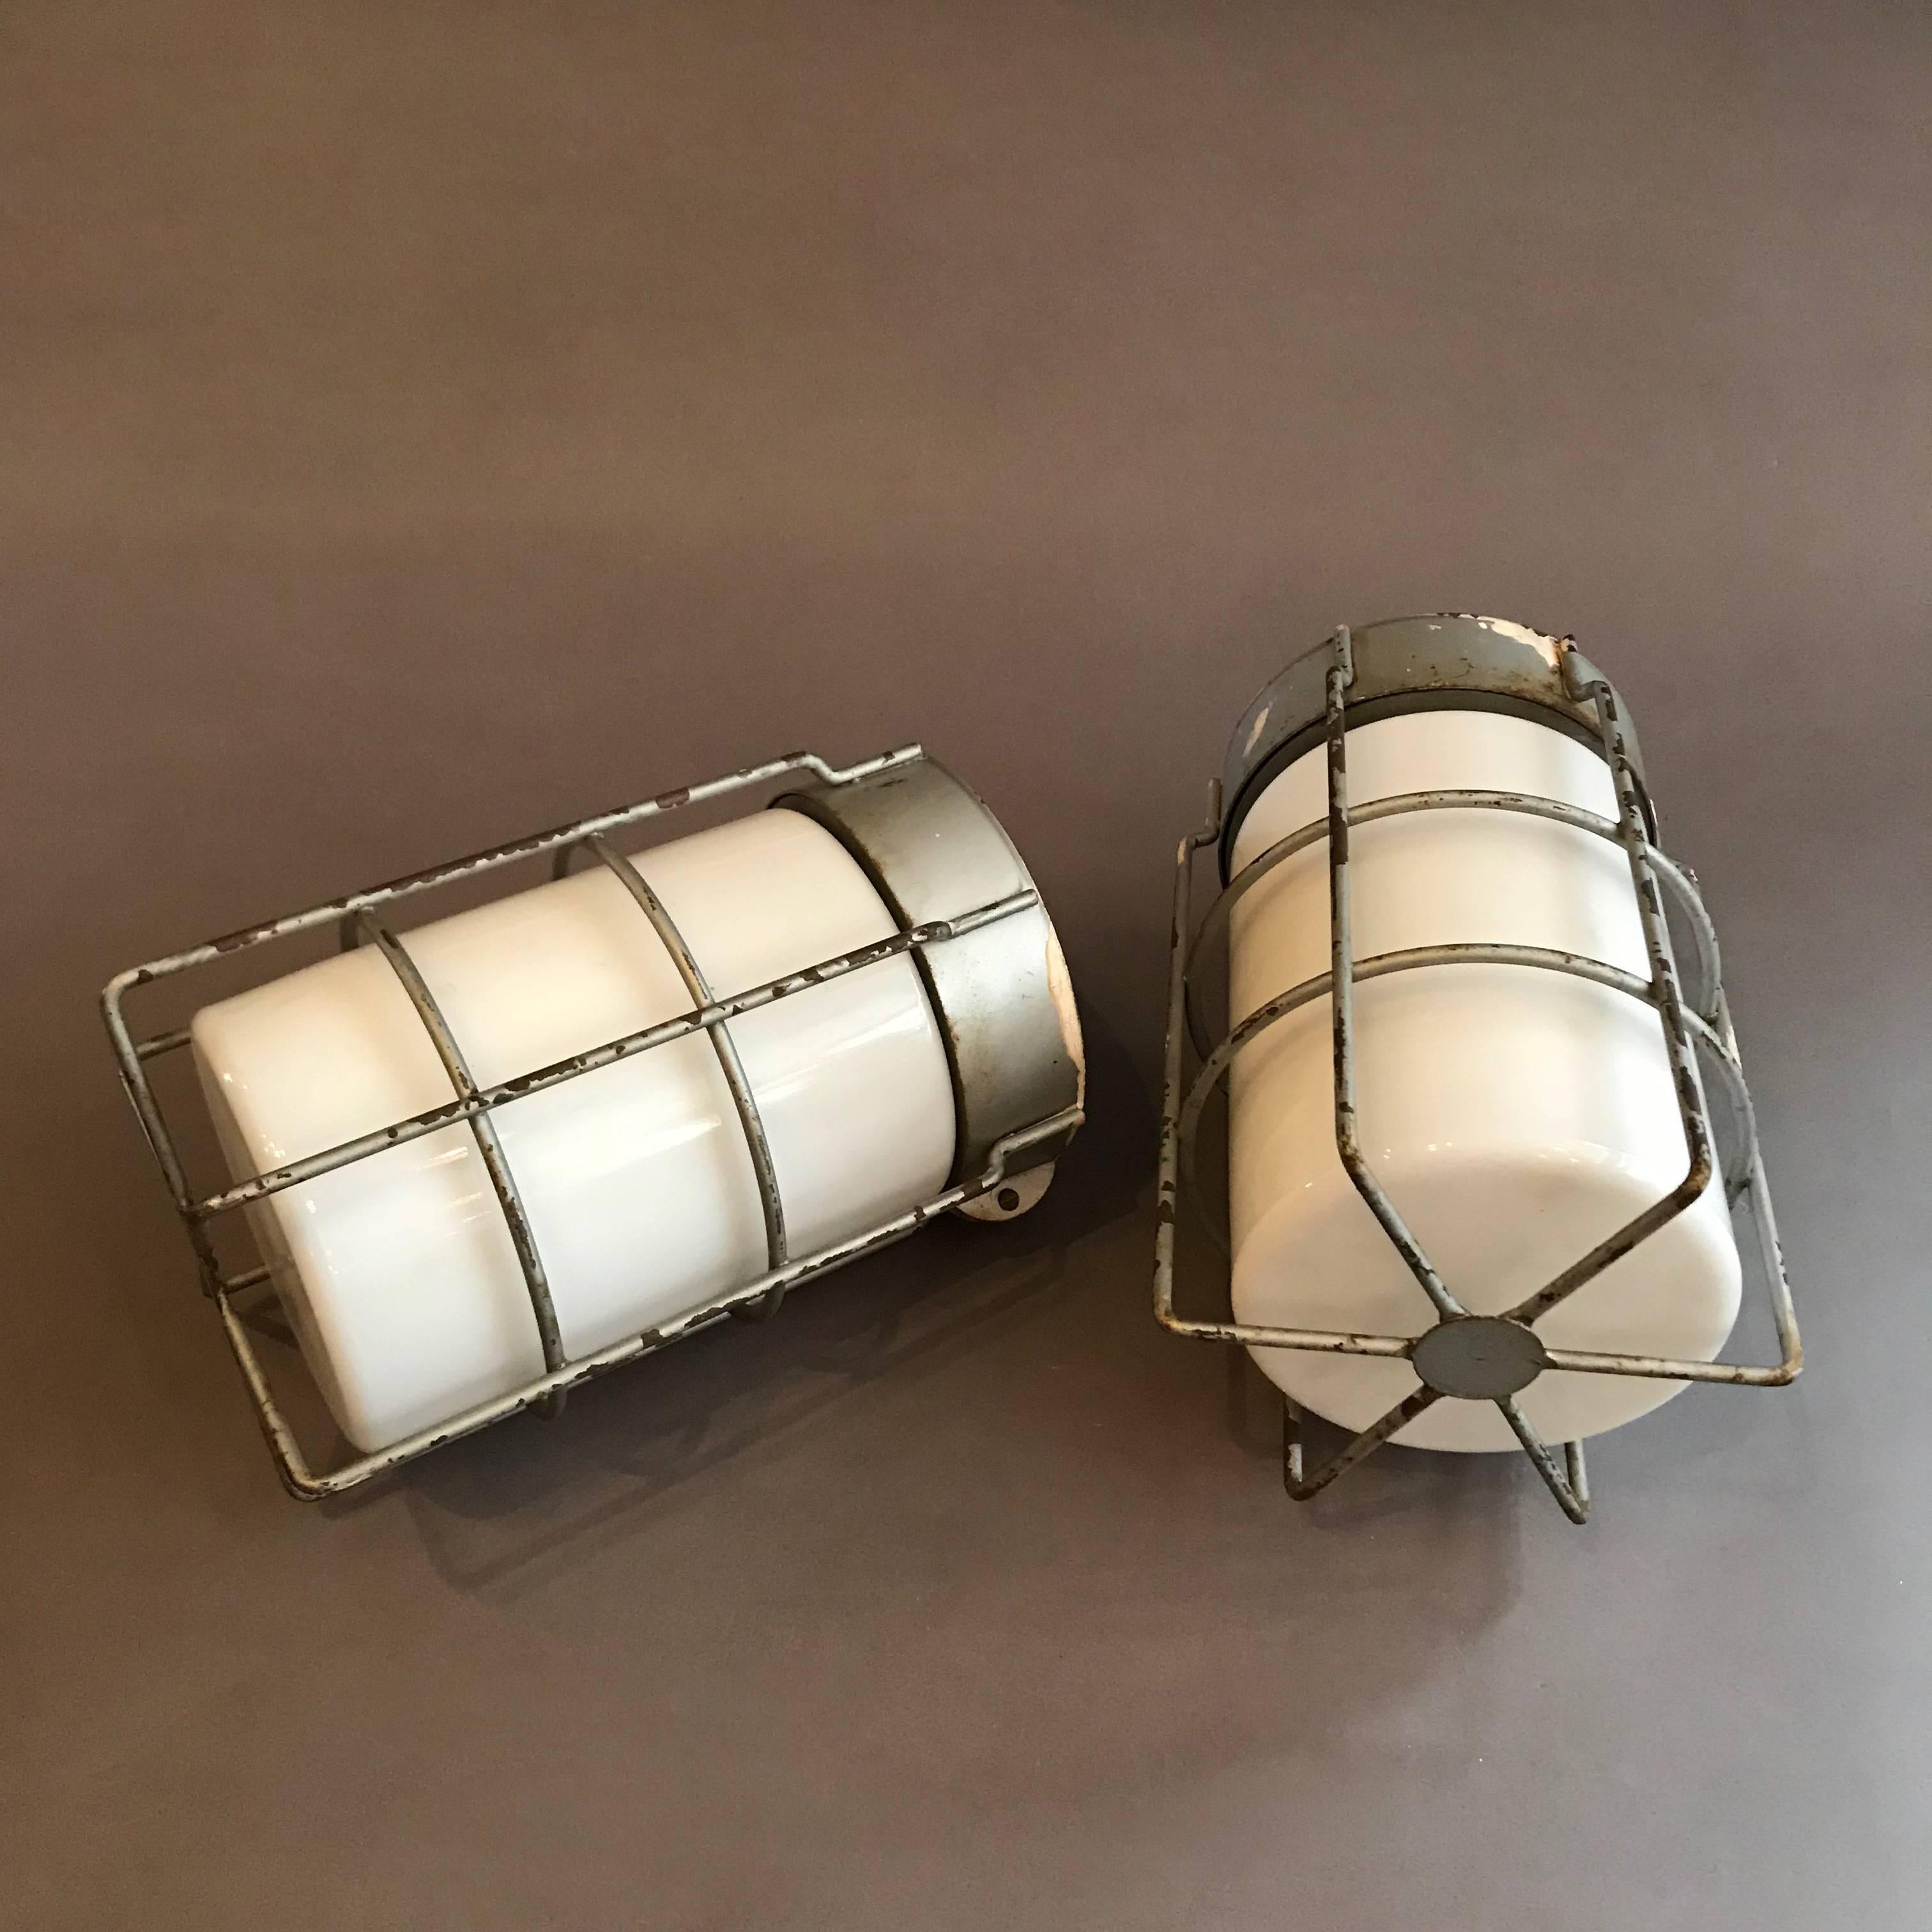 20th Century Industrial Caged Milk Glass Wall Sconce Flush Mount Ceiling Lights